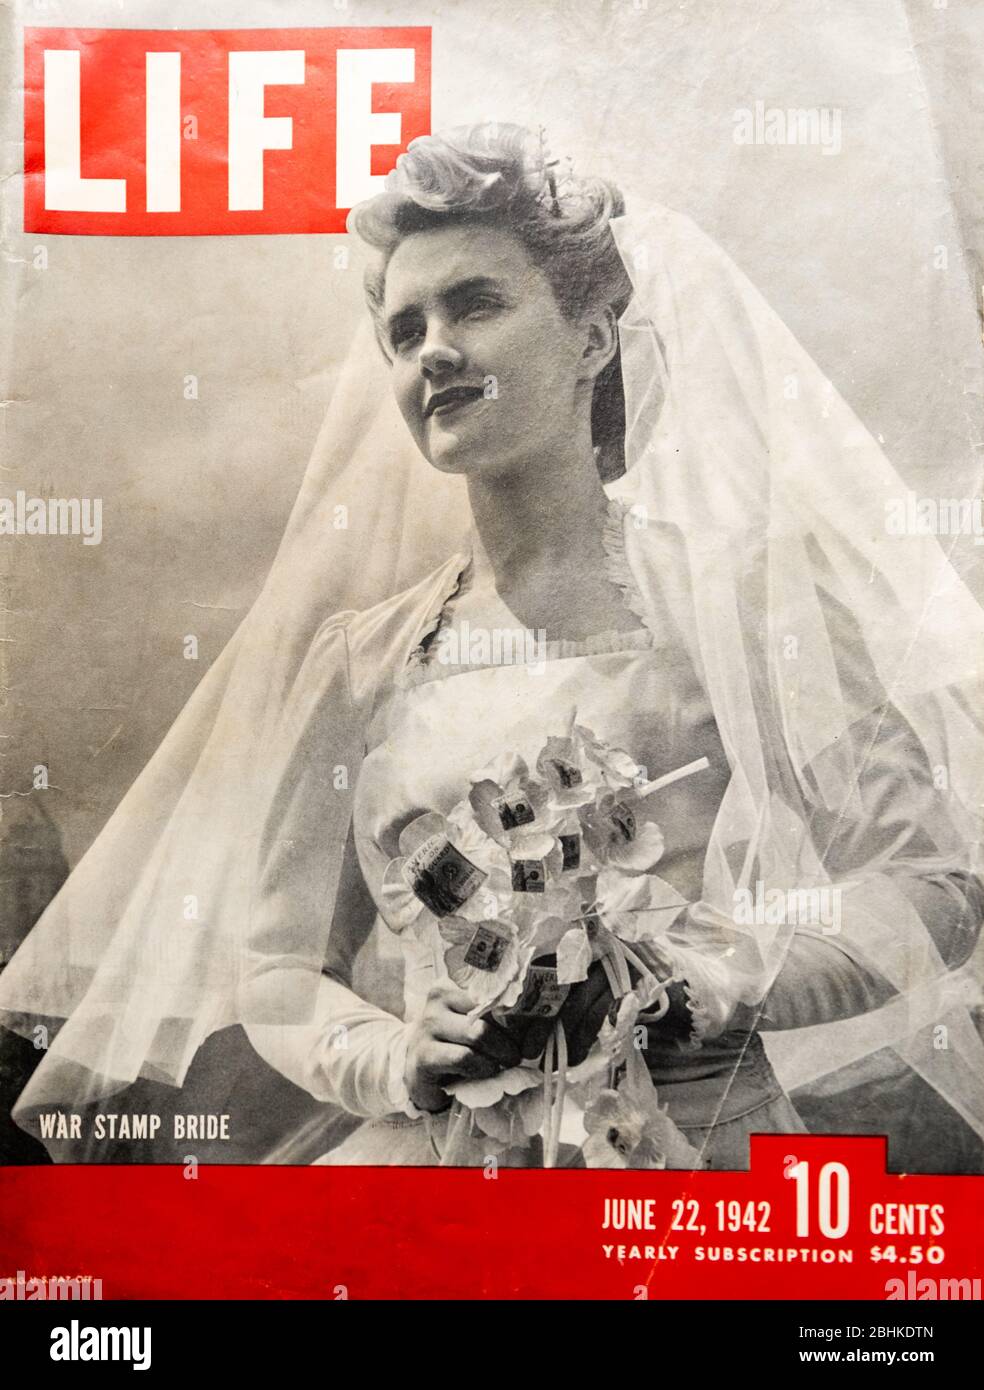 Life magazine vintage 1942 edition with a War Stamp Bride on the cover. Stock Photo